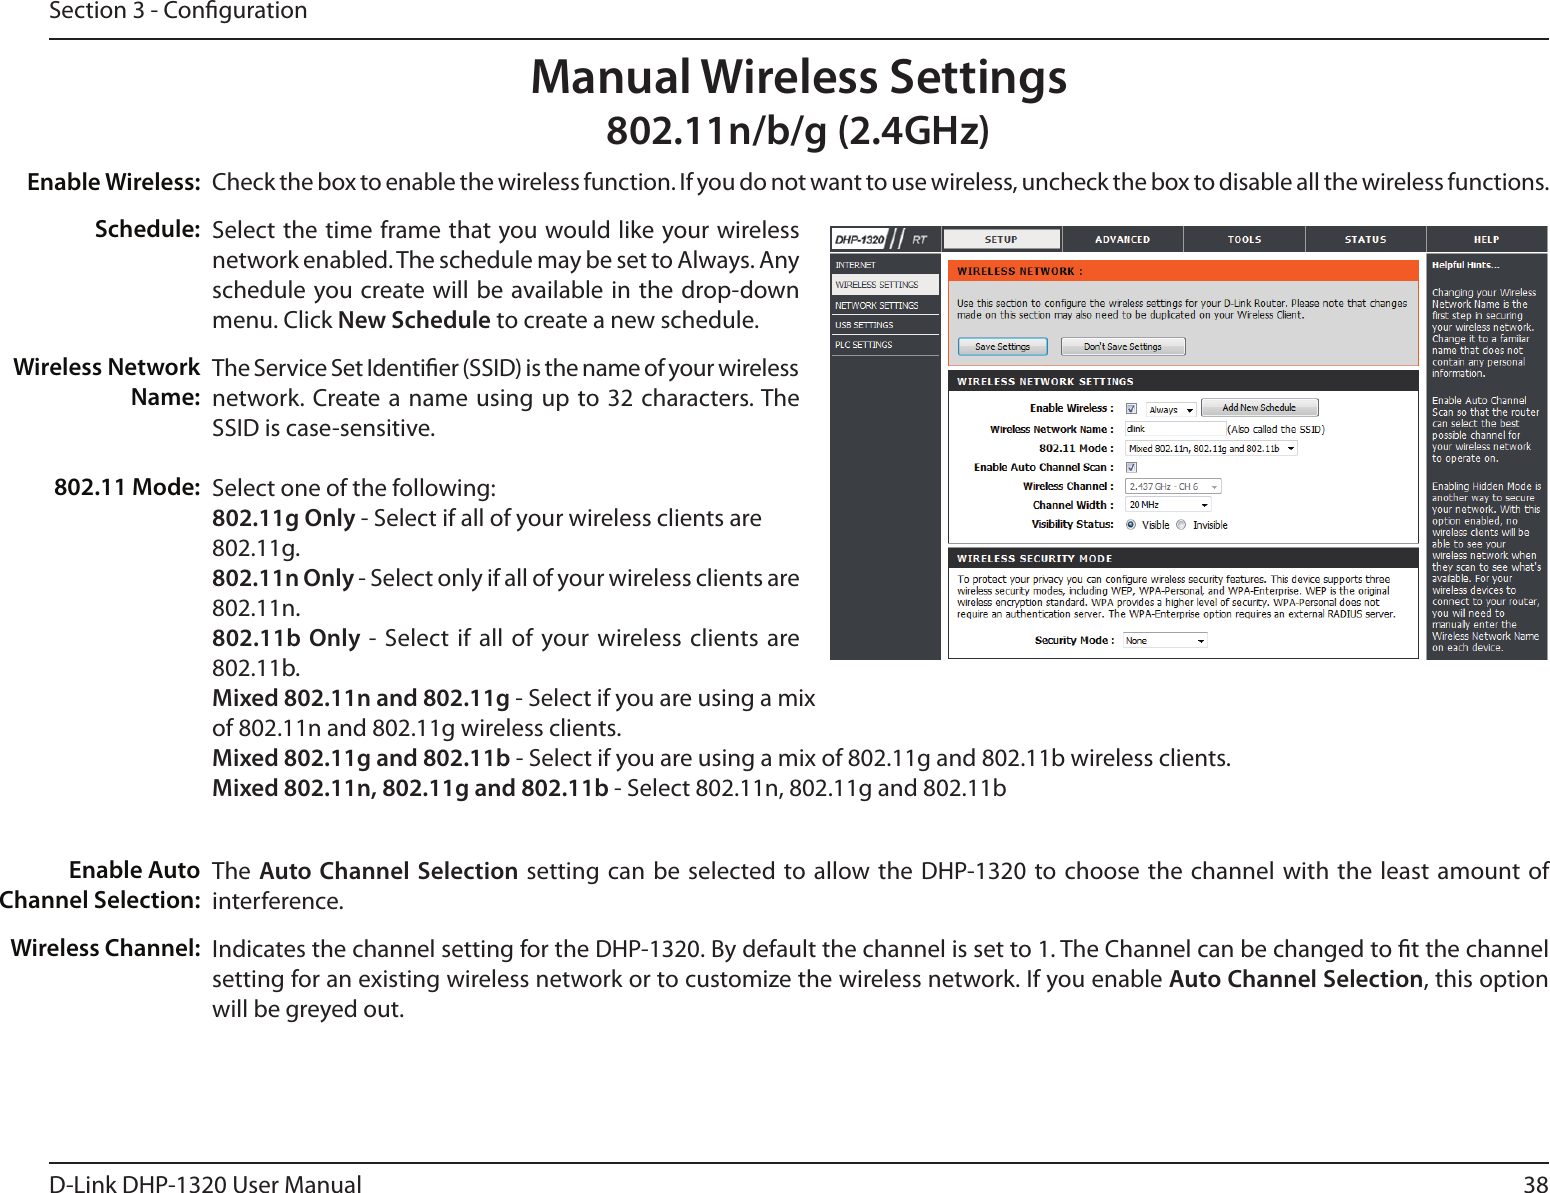 38D-Link DHP-1320 User ManualSection 3 - CongurationCheck the box to enable the wireless function. If you do not want to use wireless, uncheck the box to disable all the wireless functions.Select the time frame that you would like your wireless network enabled. The schedule may be set to Always. Any schedule you create will be  available in the drop-down menu. Click New Schedule to create a new schedule.The Service Set Identier (SSID) is the name of your wireless network. Create a name using  up to 32  characters. The SSID is case-sensitive.Select one of the following:802.11g Only - Select if all of your wireless clients are802.11g.802.11n Only - Select only if all of your wireless clients are802.11n.802.11b Only - Select if all of your wireless clients  are 802.11b.Mixed 802.11n and 802.11g - Select if you are using a mixof 802.11n and 802.11g wireless clients.Mixed 802.11g and 802.11b - Select if you are using a mix of 802.11g and 802.11b wireless clients. Mixed 802.11n, 802.11g and 802.11b - Select 802.11n, 802.11g and 802.11bThe Auto Channel Selection setting can be selected to allow the DHP-1320 to choose the channel with the least amount of interference.Indicates the channel setting for the DHP-1320. By default the channel is set to 1. The Channel can be changed to t the channel setting for an existing wireless network or to customize the wireless network. If you enable Auto Channel Selection, this option will be greyed out.Enable Wireless:Schedule:Wireless Network Name:802.11 Mode:Enable Auto Channel Selection:Wireless Channel:Manual Wireless Settings802.11n/b/g (2.4GHz)